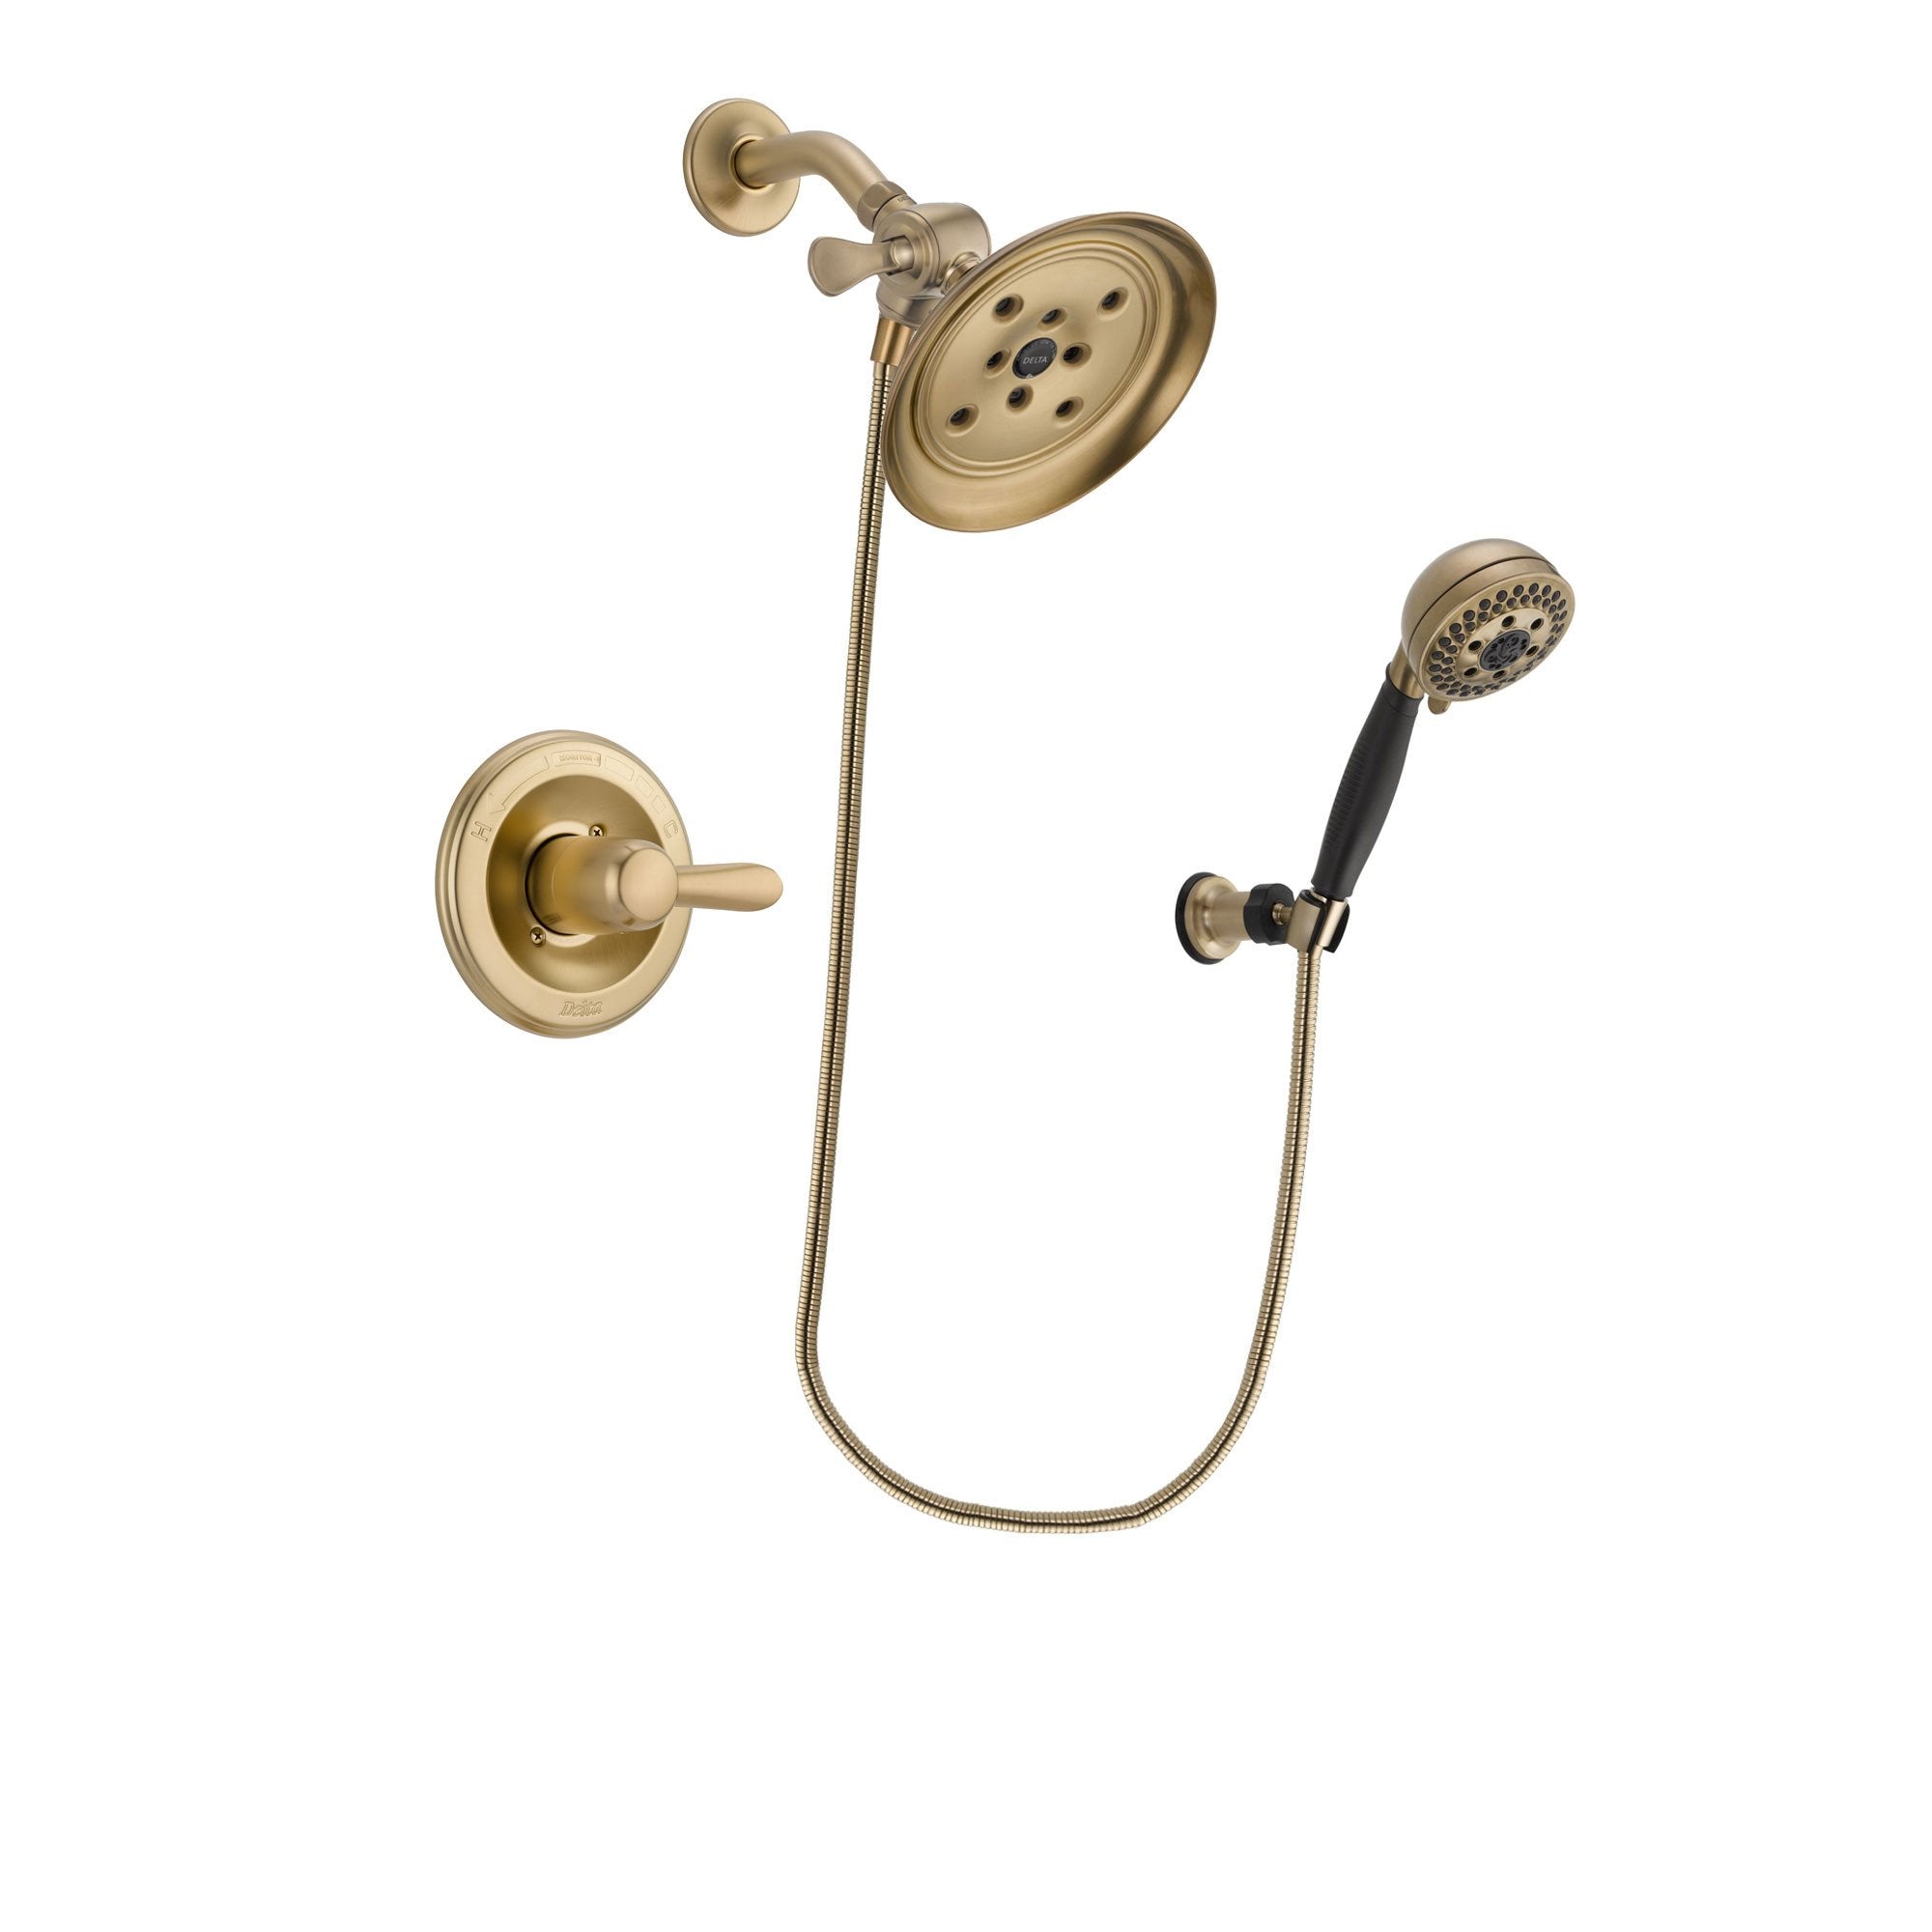 Delta Lahara Champagne Bronze Finish Shower Faucet System Package with Large Rain Shower Head and 5-Spray Wall Mount Hand Shower Includes Rough-in Valve DSP3794V